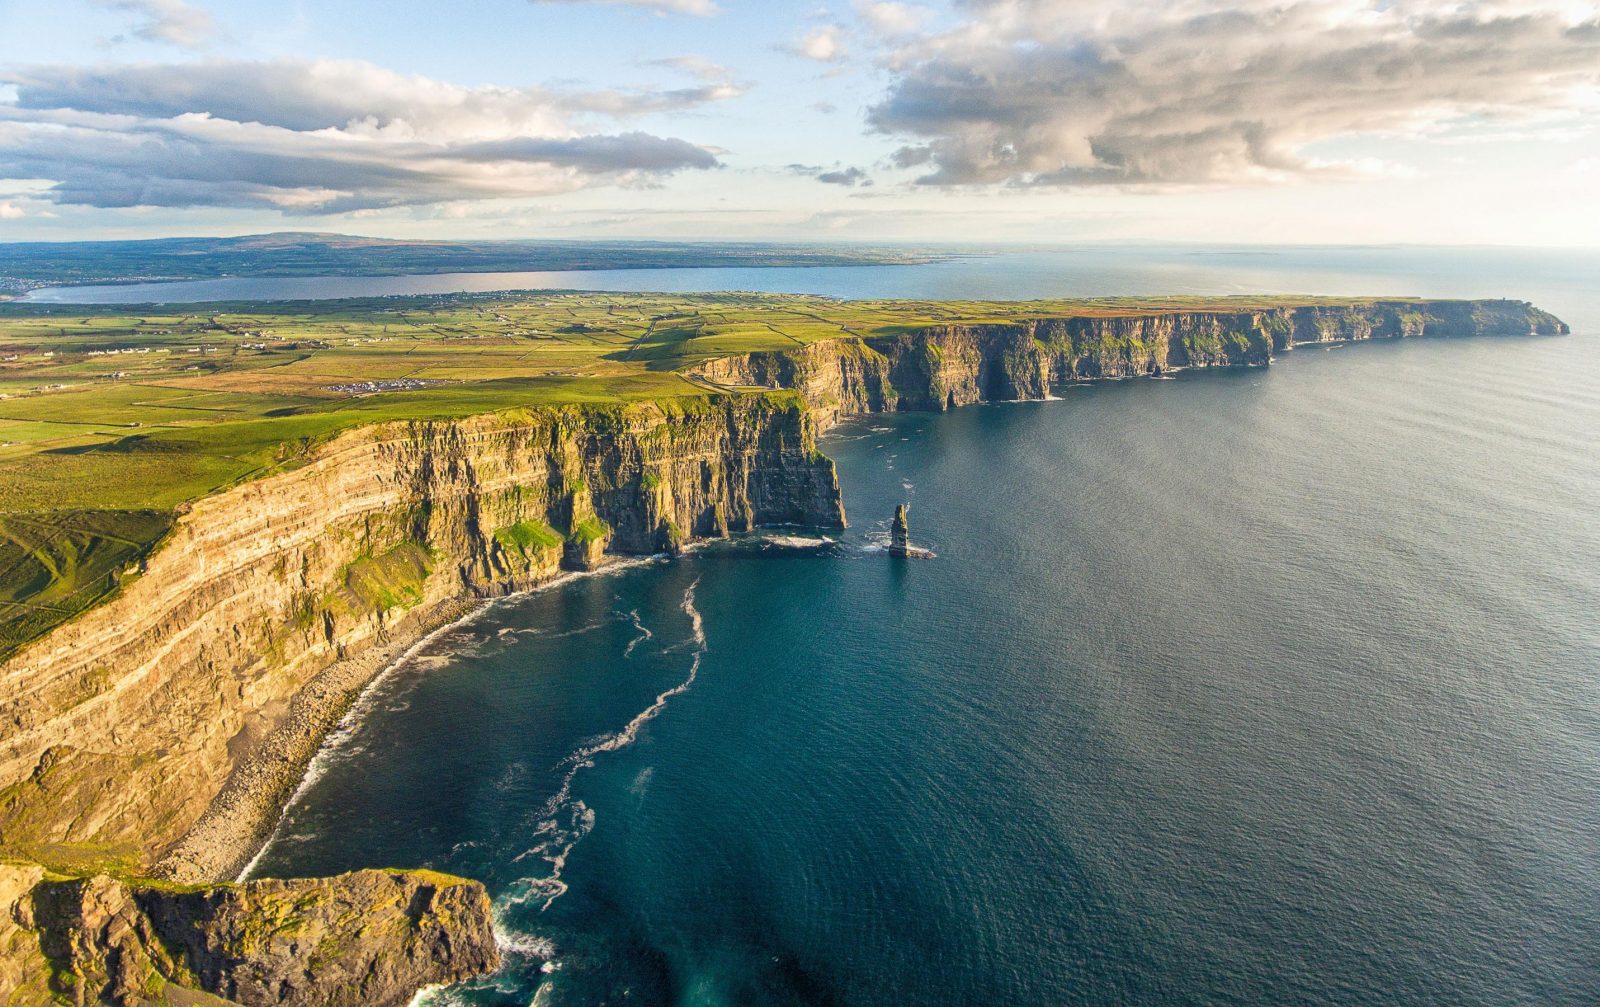 Can You Pass This 40-Question Geography Test That Gets Progressively Harder With Each Question? Cliffs of Moher, Ireland